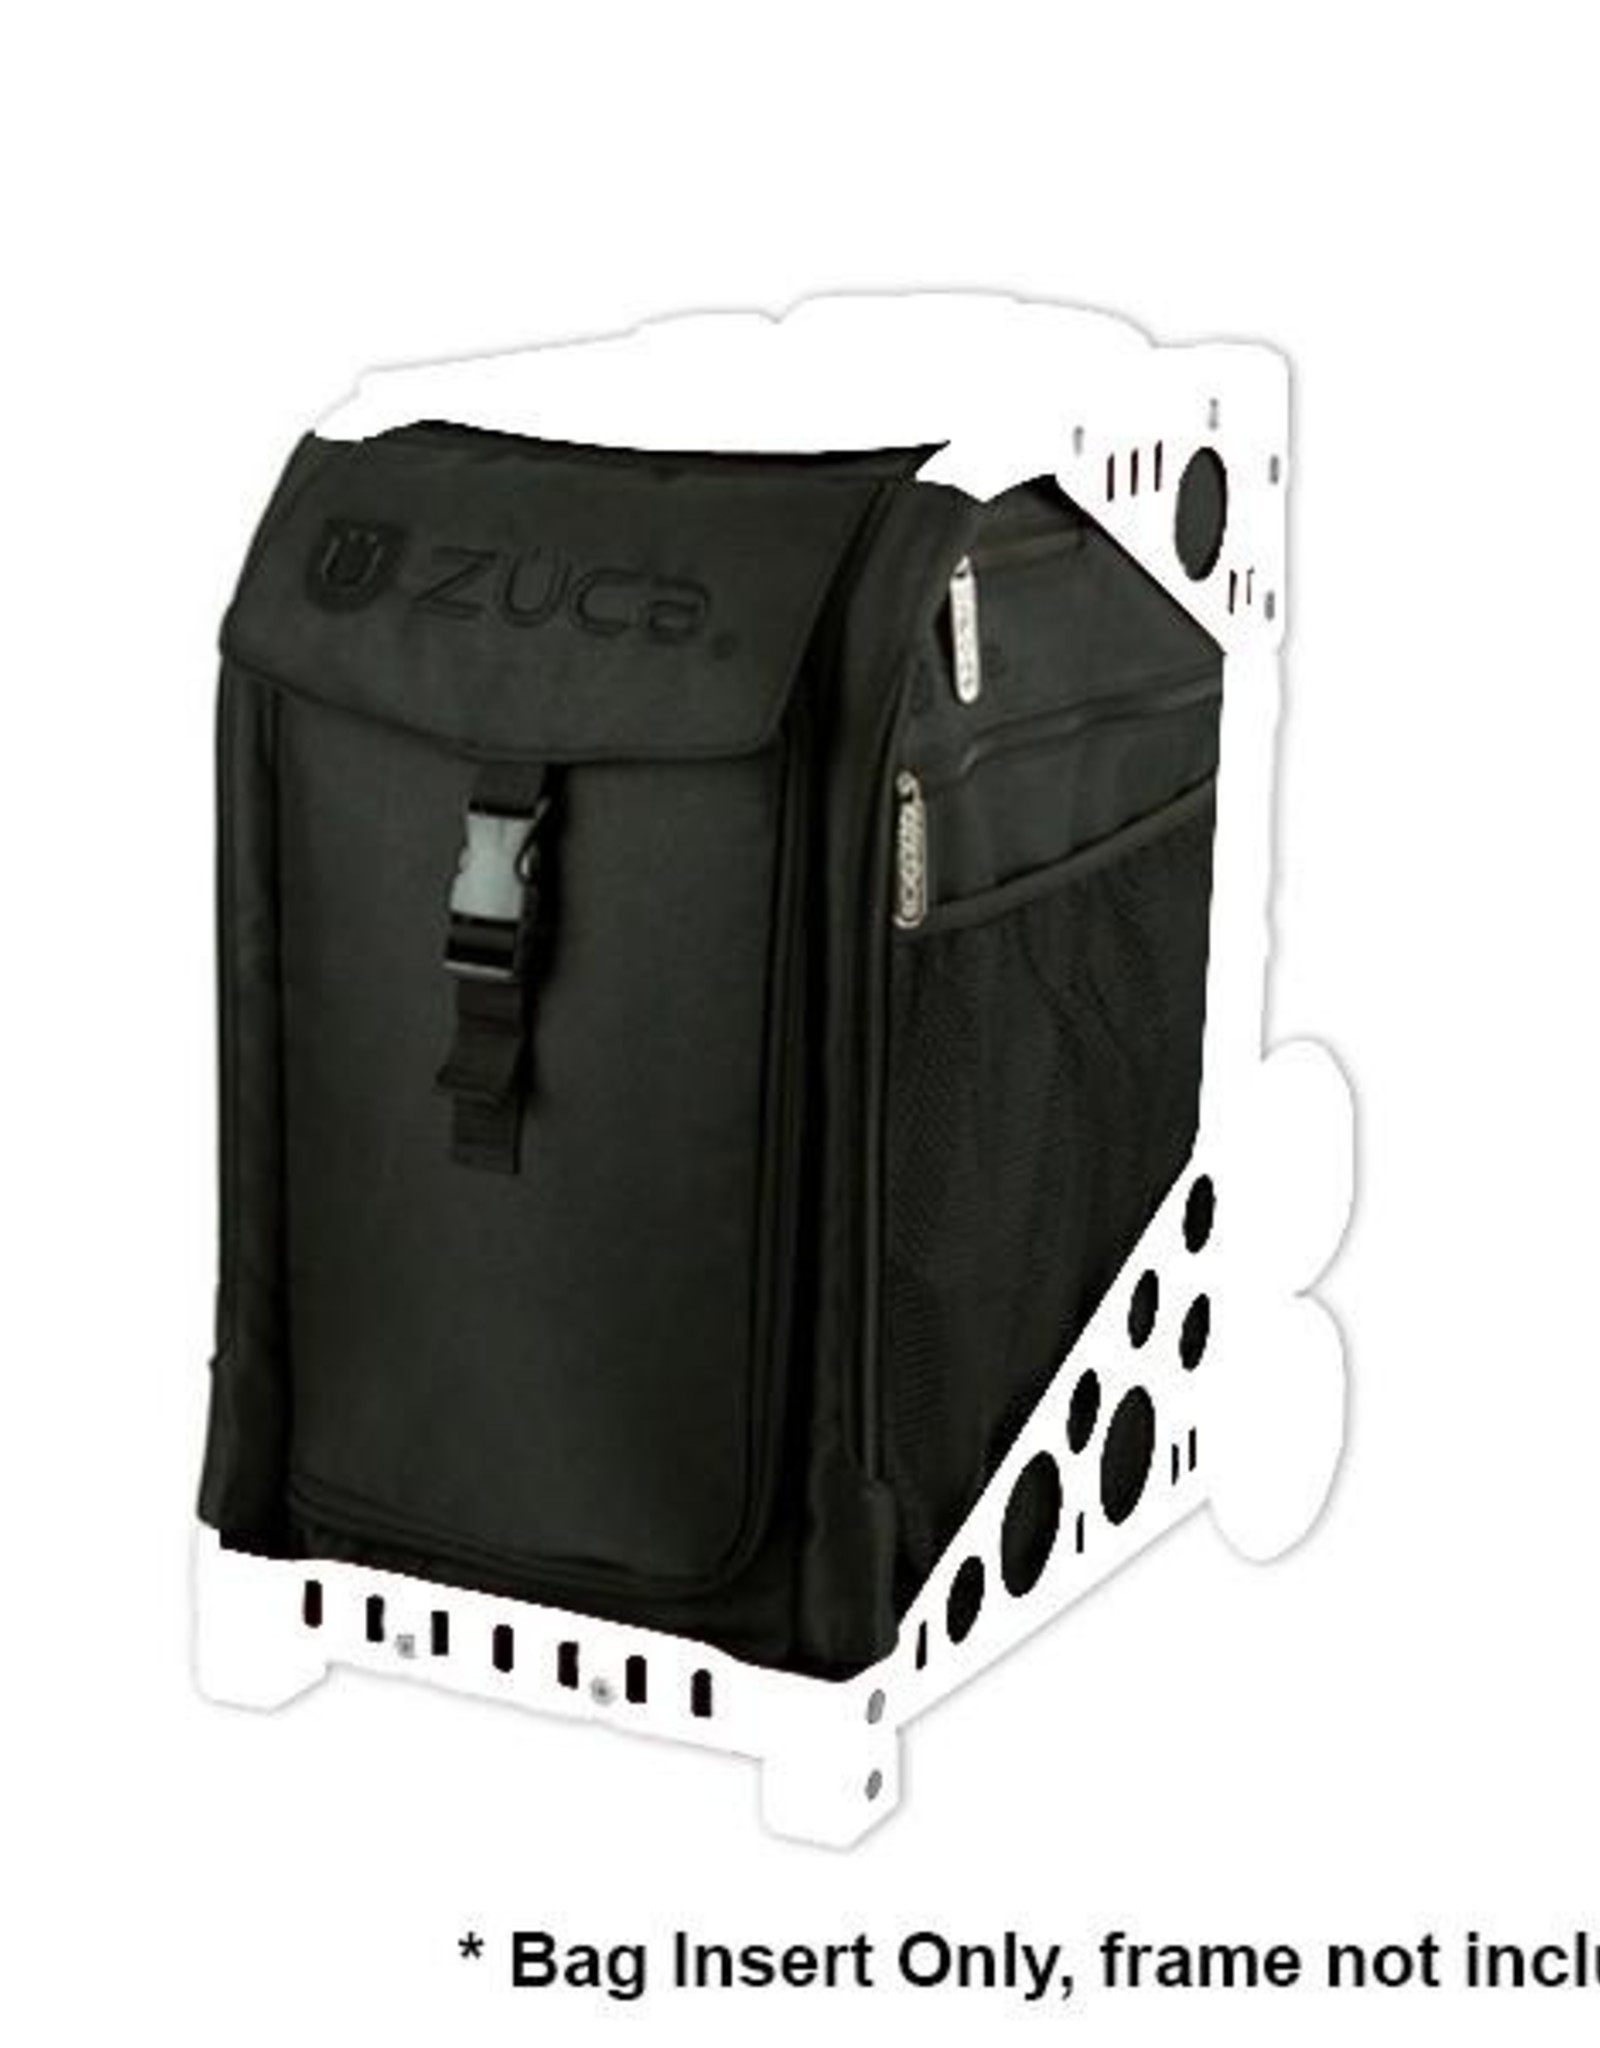 Zuca BAG STEALTH Frame is not Included